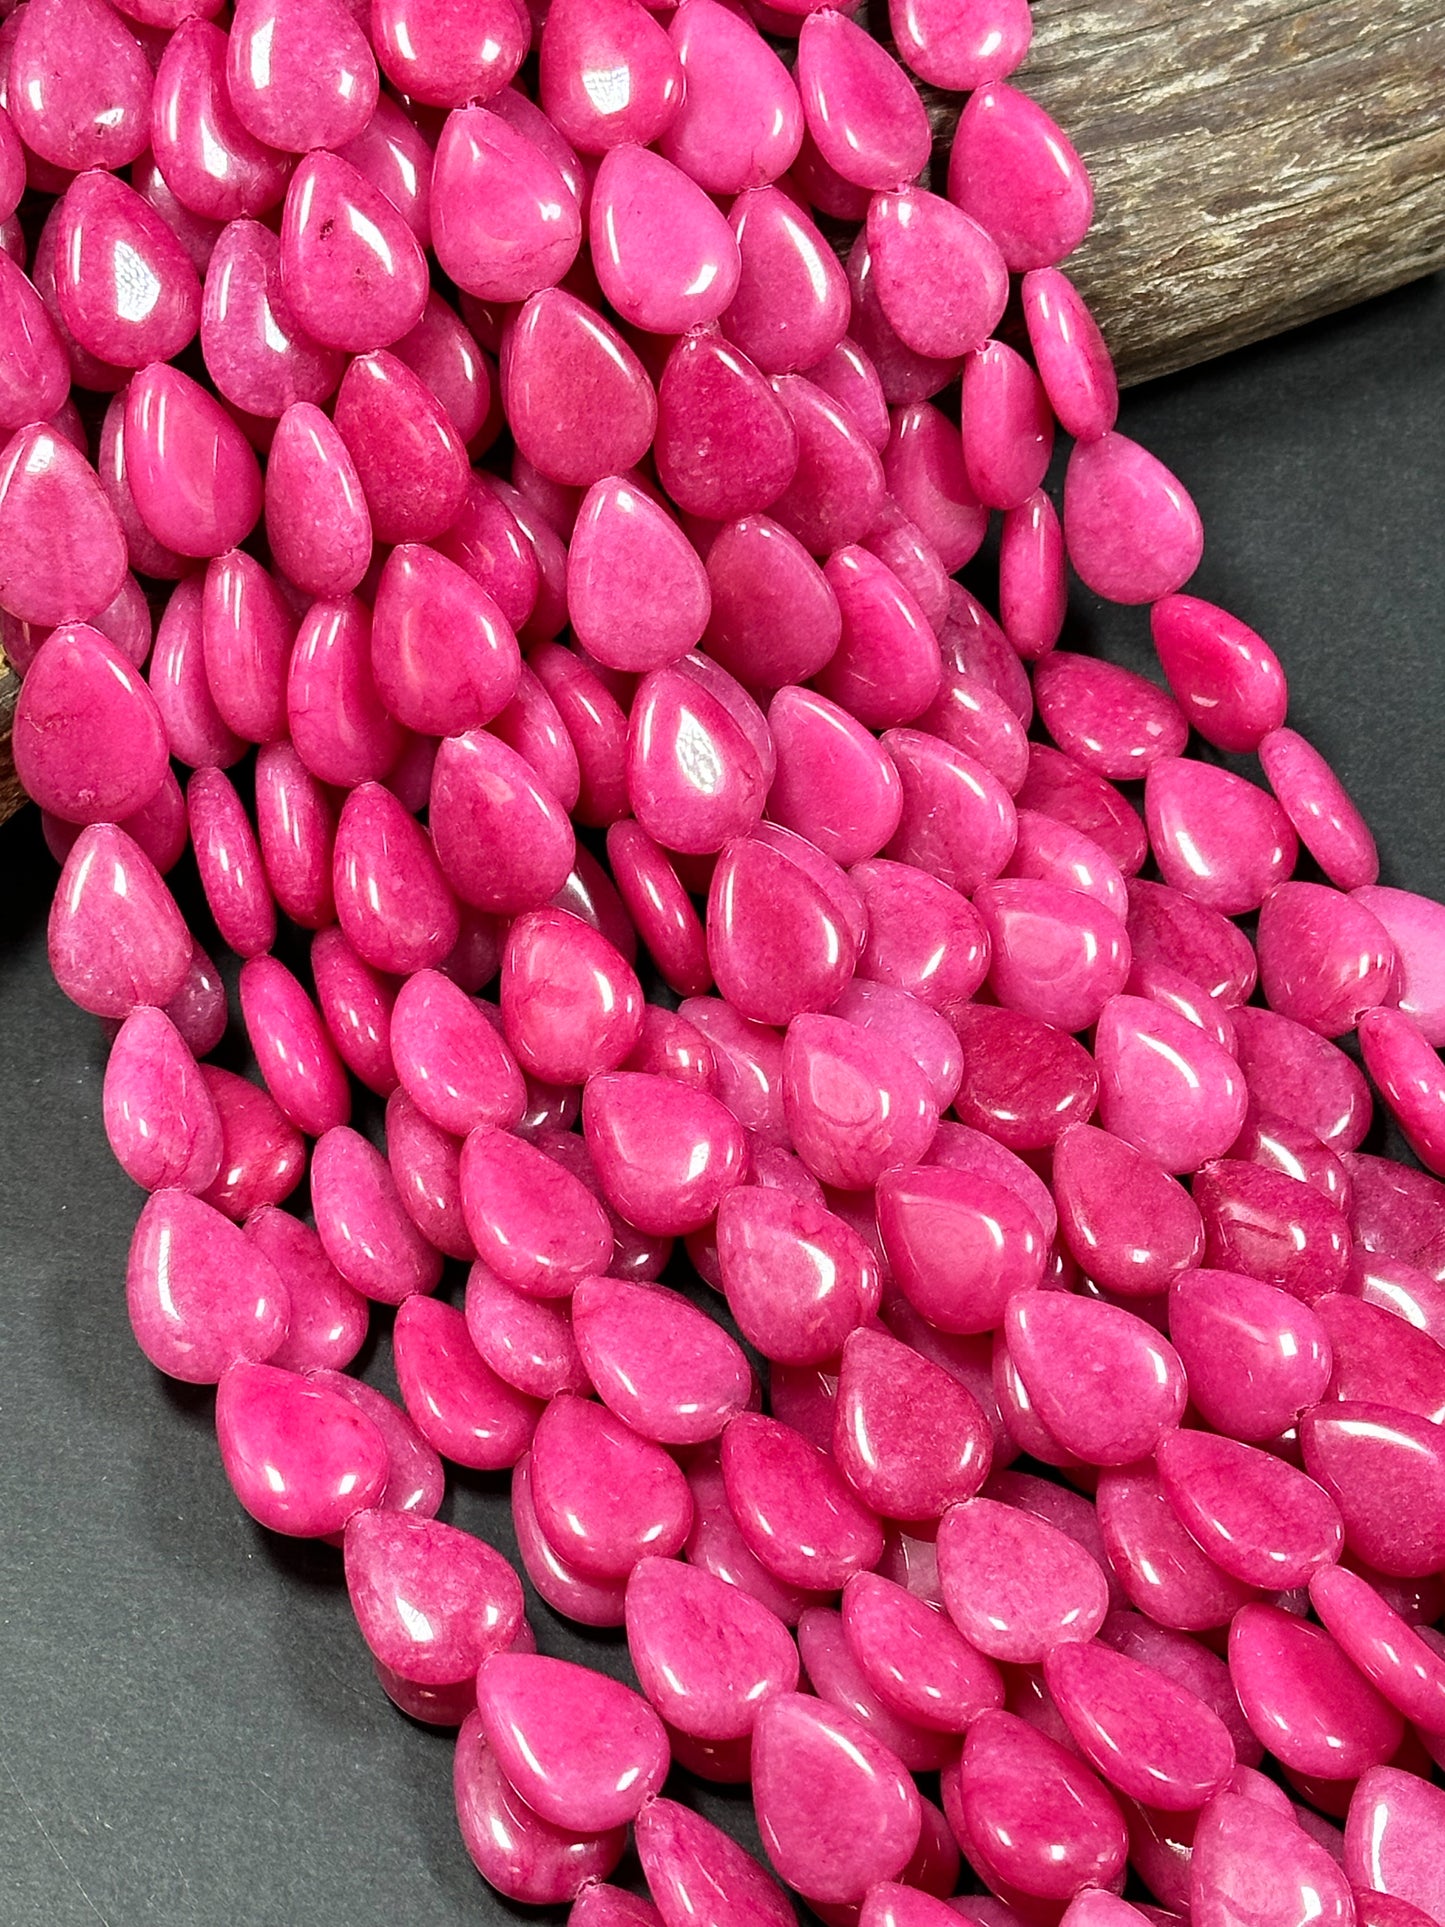 Natural Pink Jade Gemstone Bead 20x15mm Teardrop Shape, Beautiful Hot Pink Color Jade Gemstone Bead Excellent Quality Full Strand 15.5"